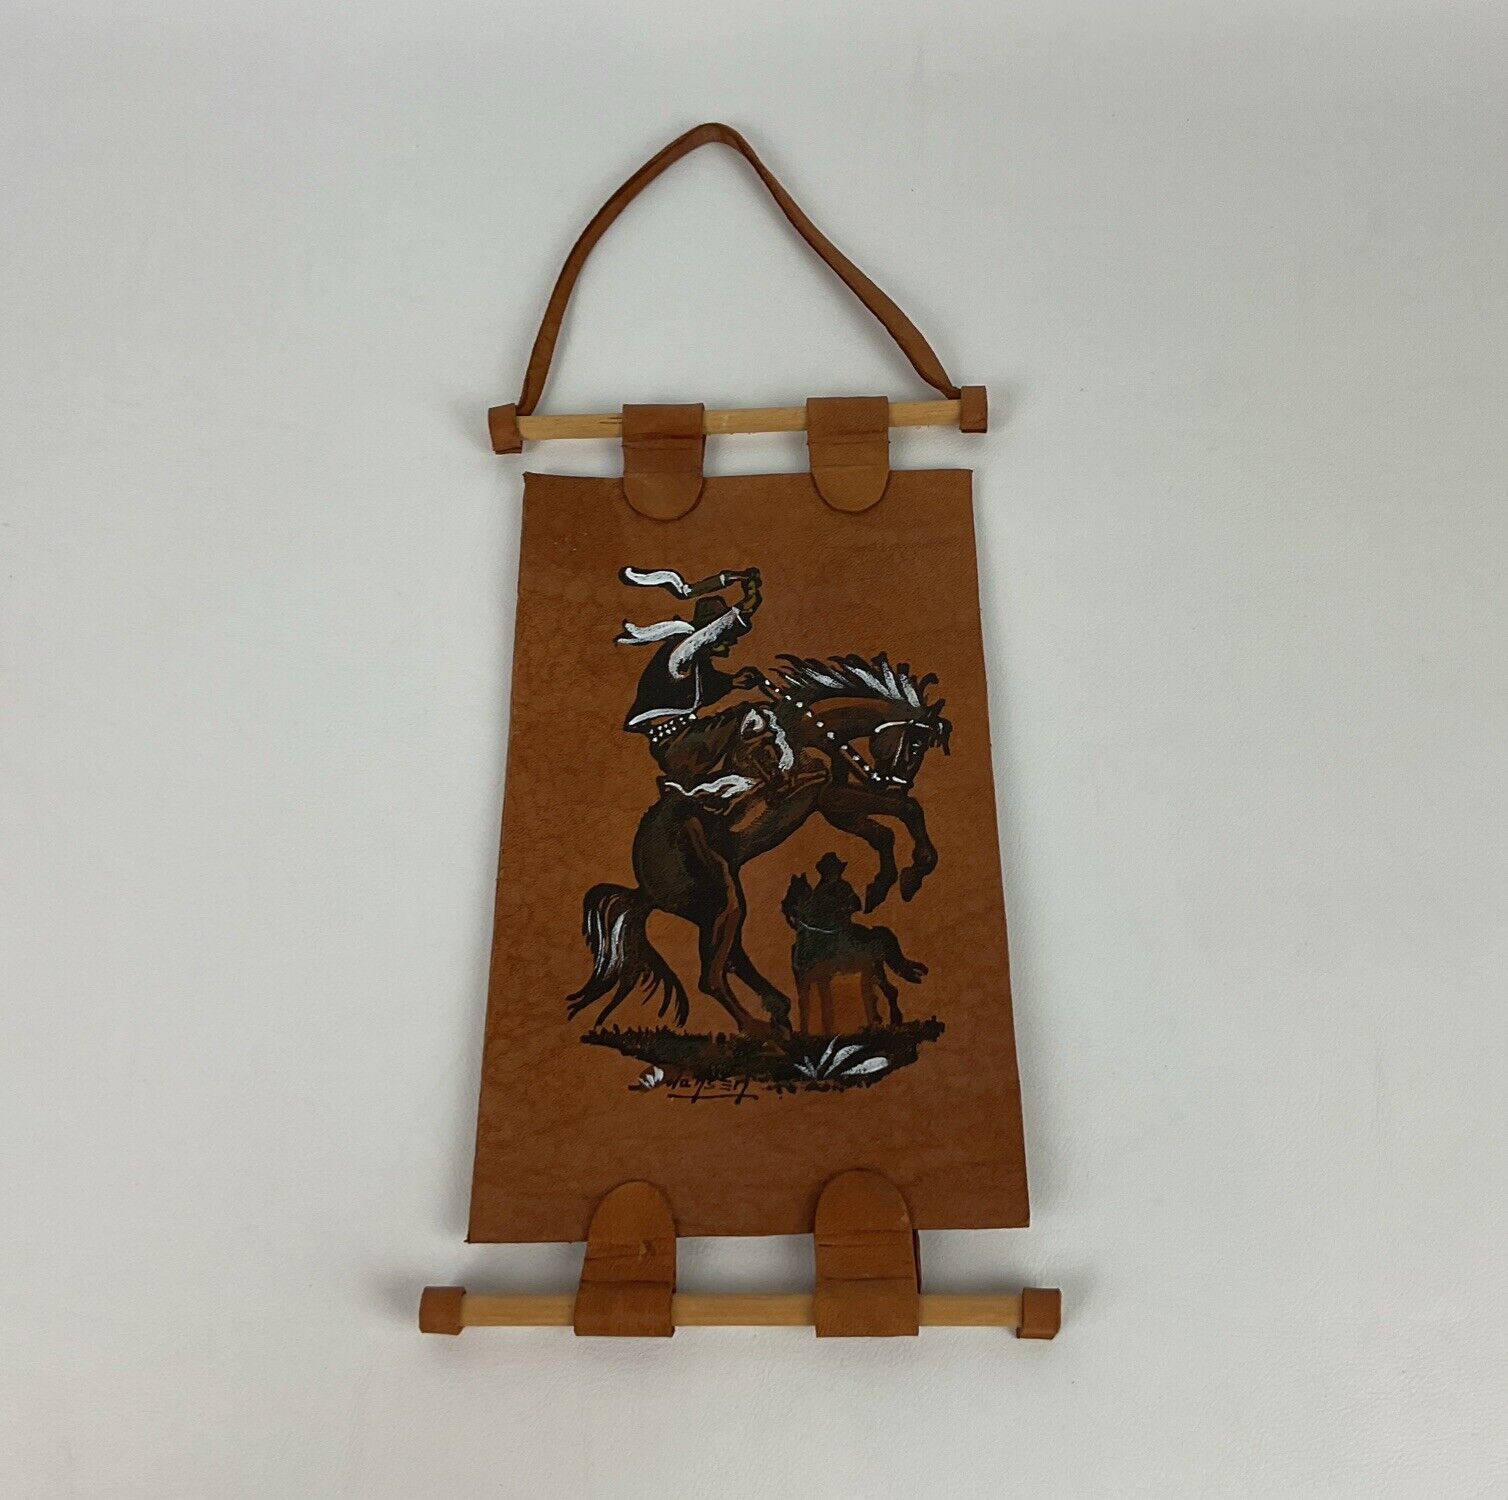 Rustic Western Leather Wall Art with Cowboy Horse Motif